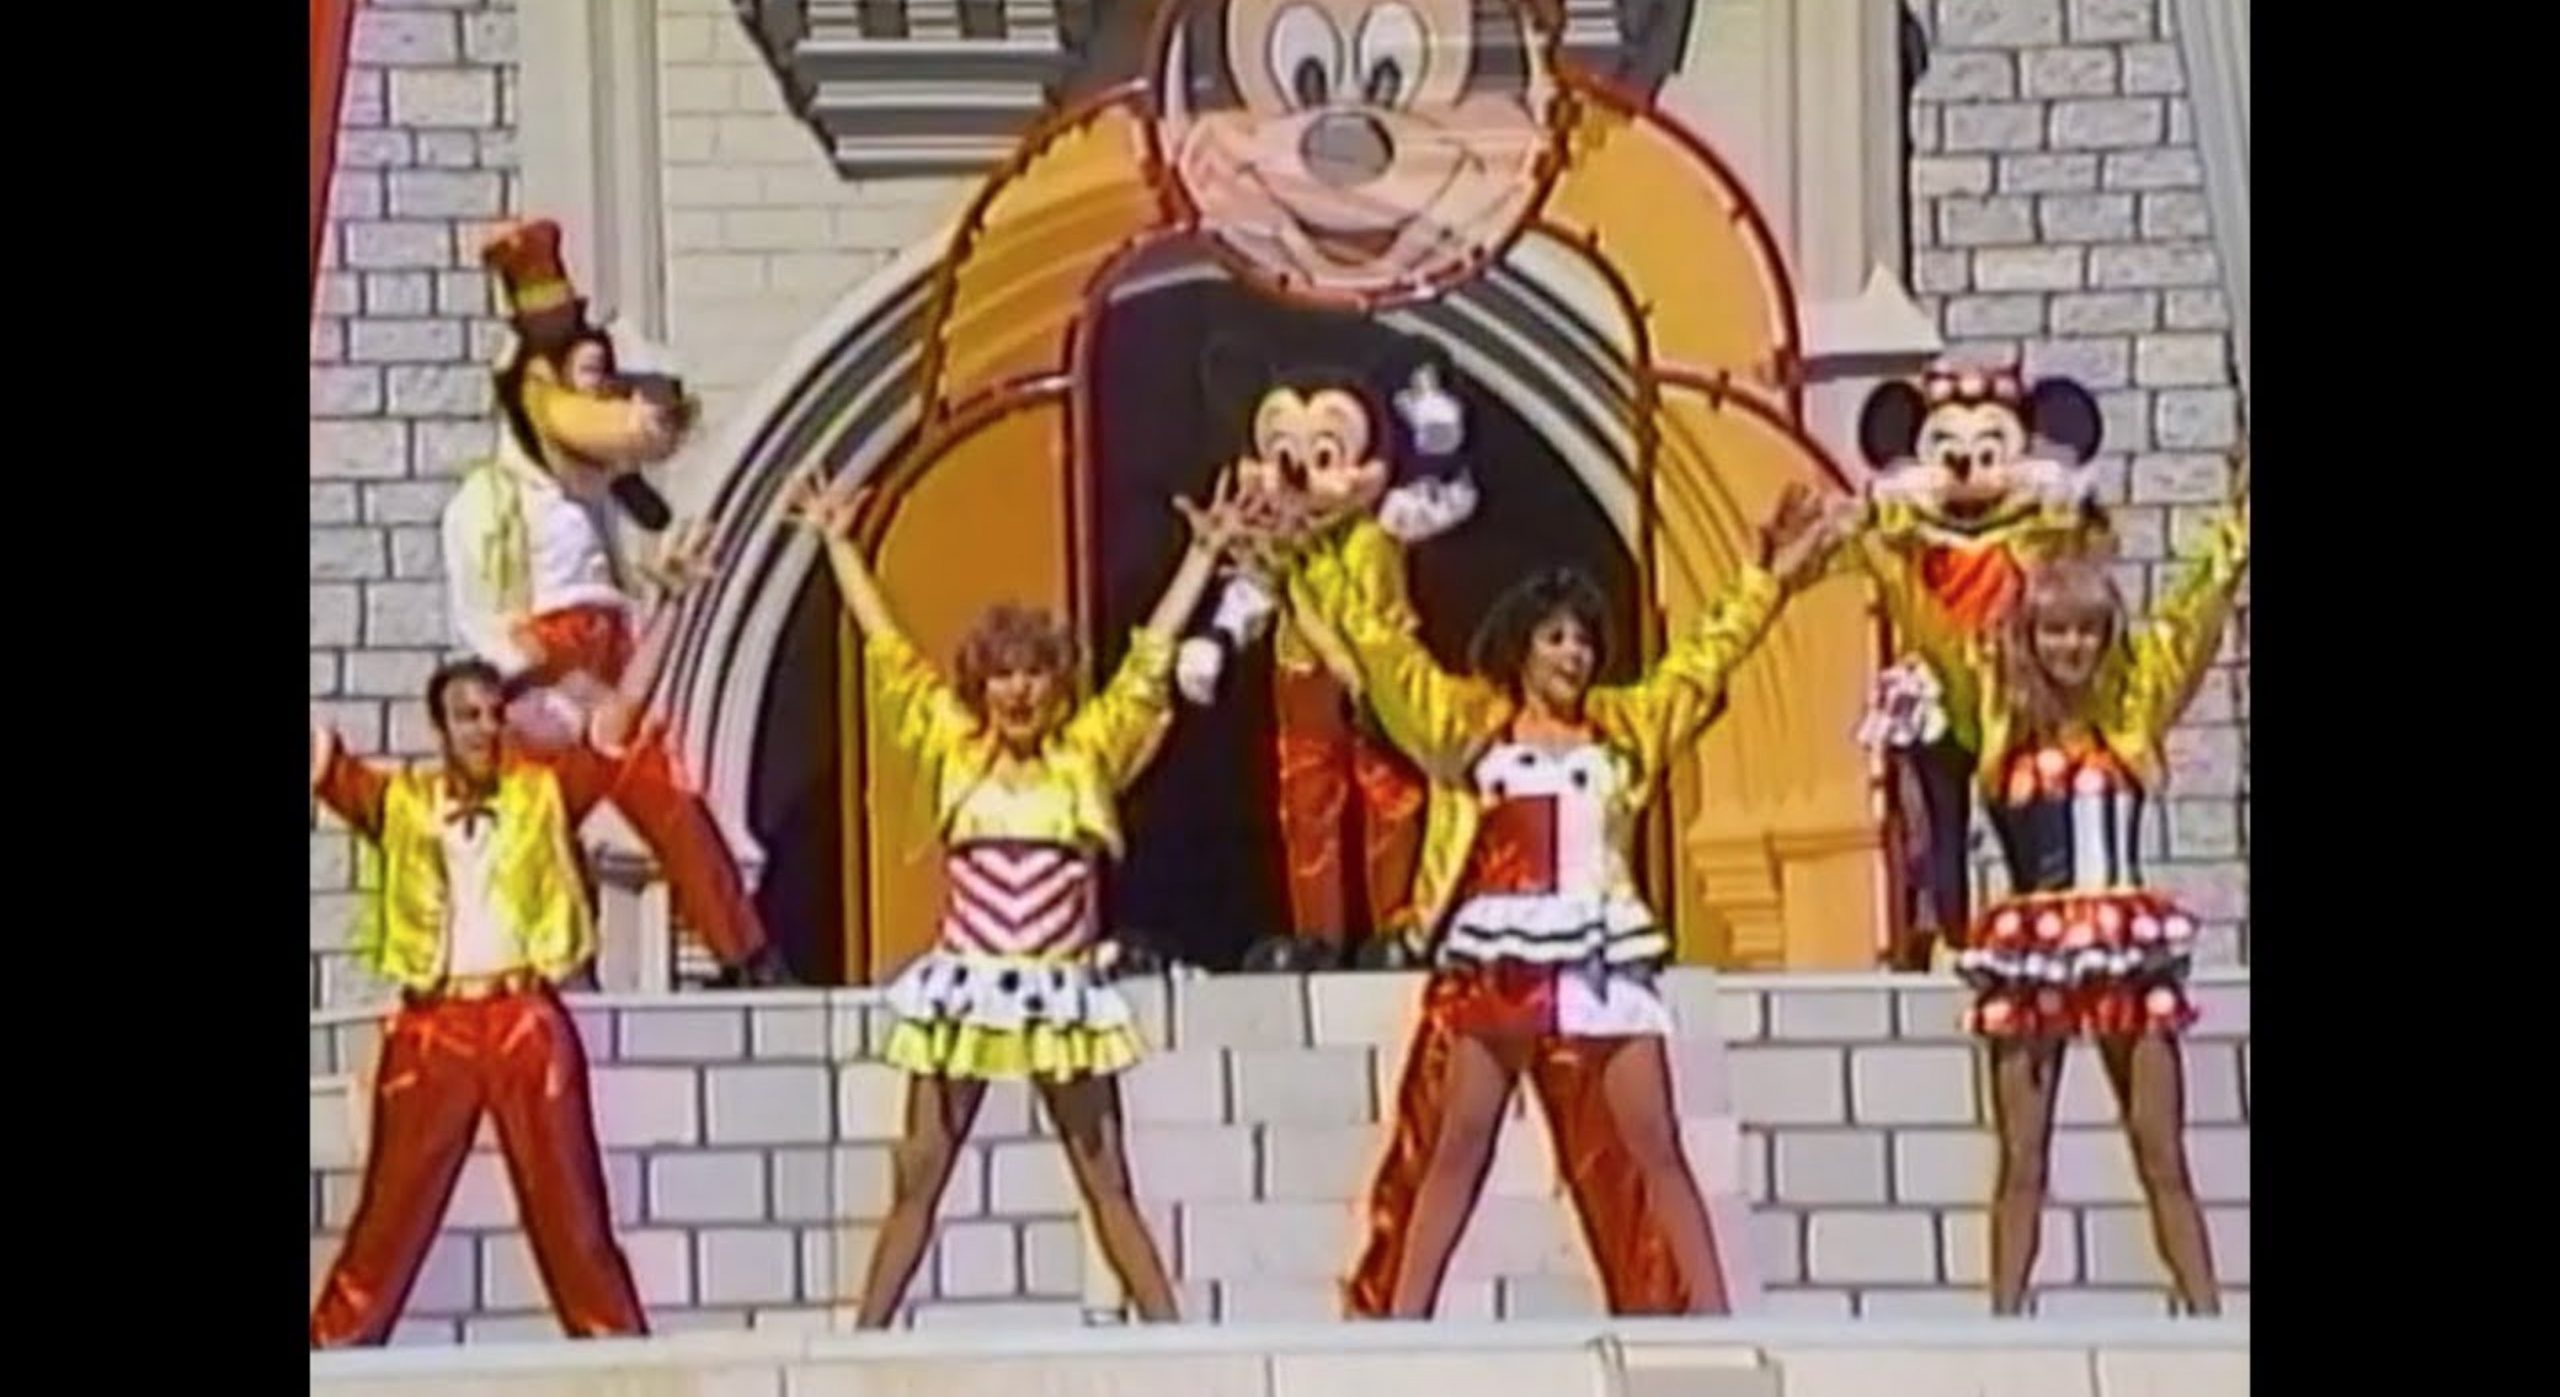 ‘Kids of the Kingdom’ 1980’s-2000’s Alumni Create an At Home Performance of the Iconic Stage Show from Walt Disney World